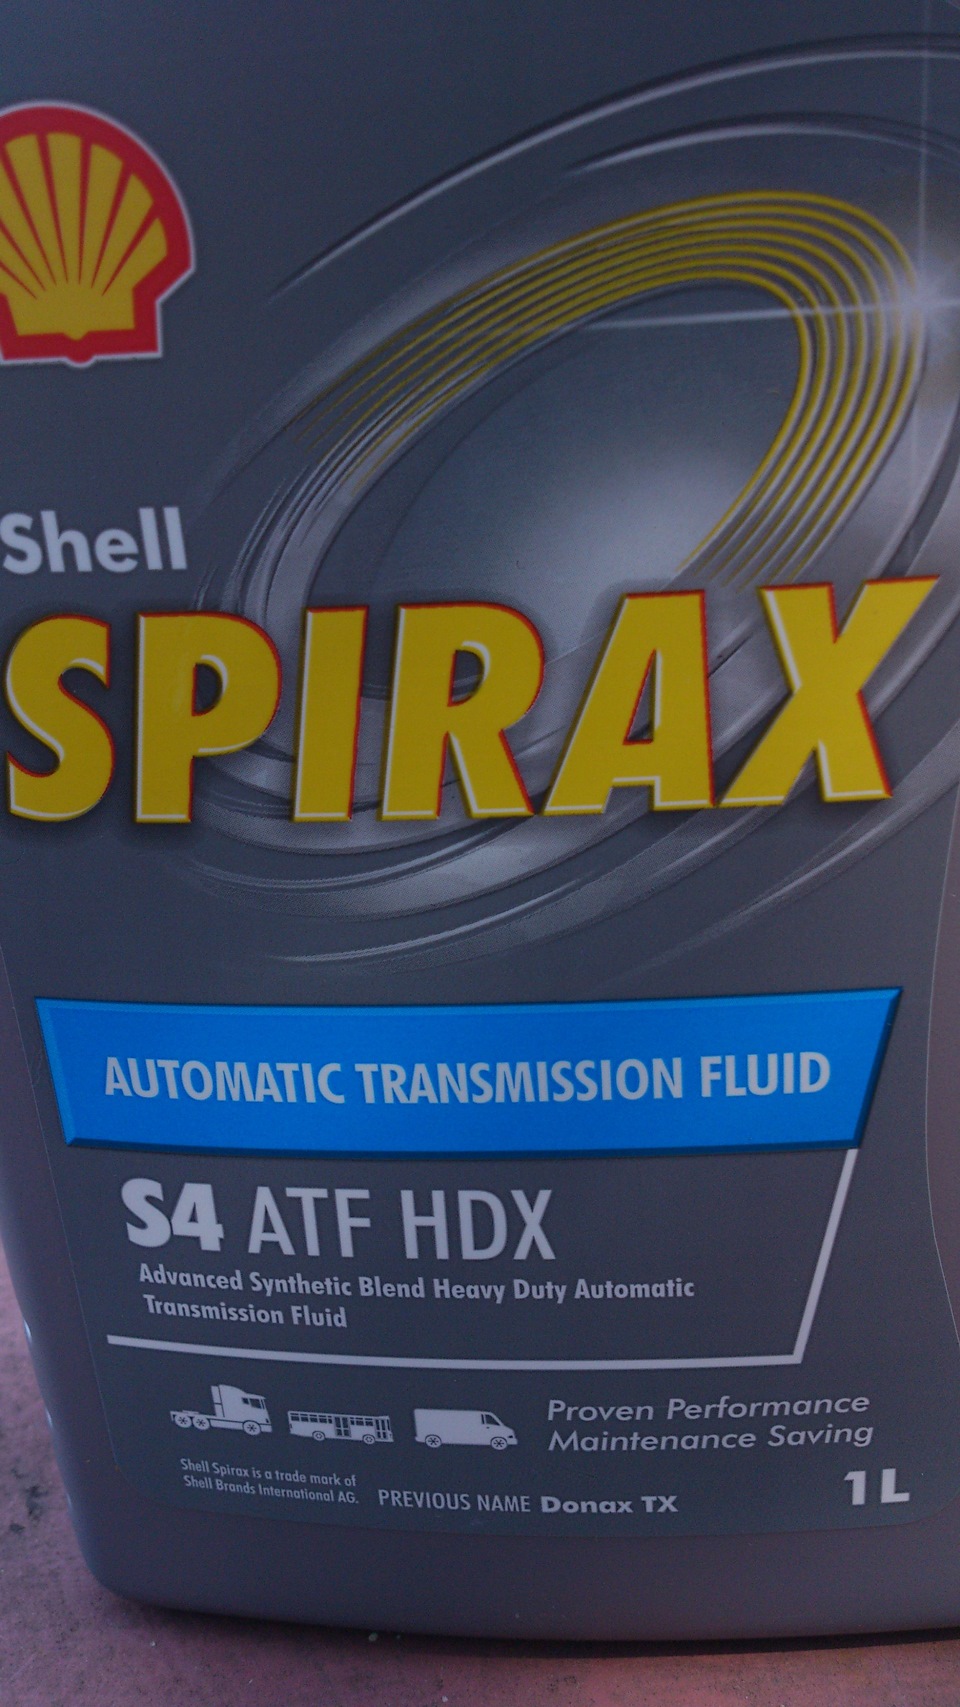 Shell s4 atf. Shell Spirax s4 ATF hdx. Shell Spirax s4 ATF hdx бочка. Shell Spirax s4 ATF hdx drive2. Shell ATF Donax 1 л.